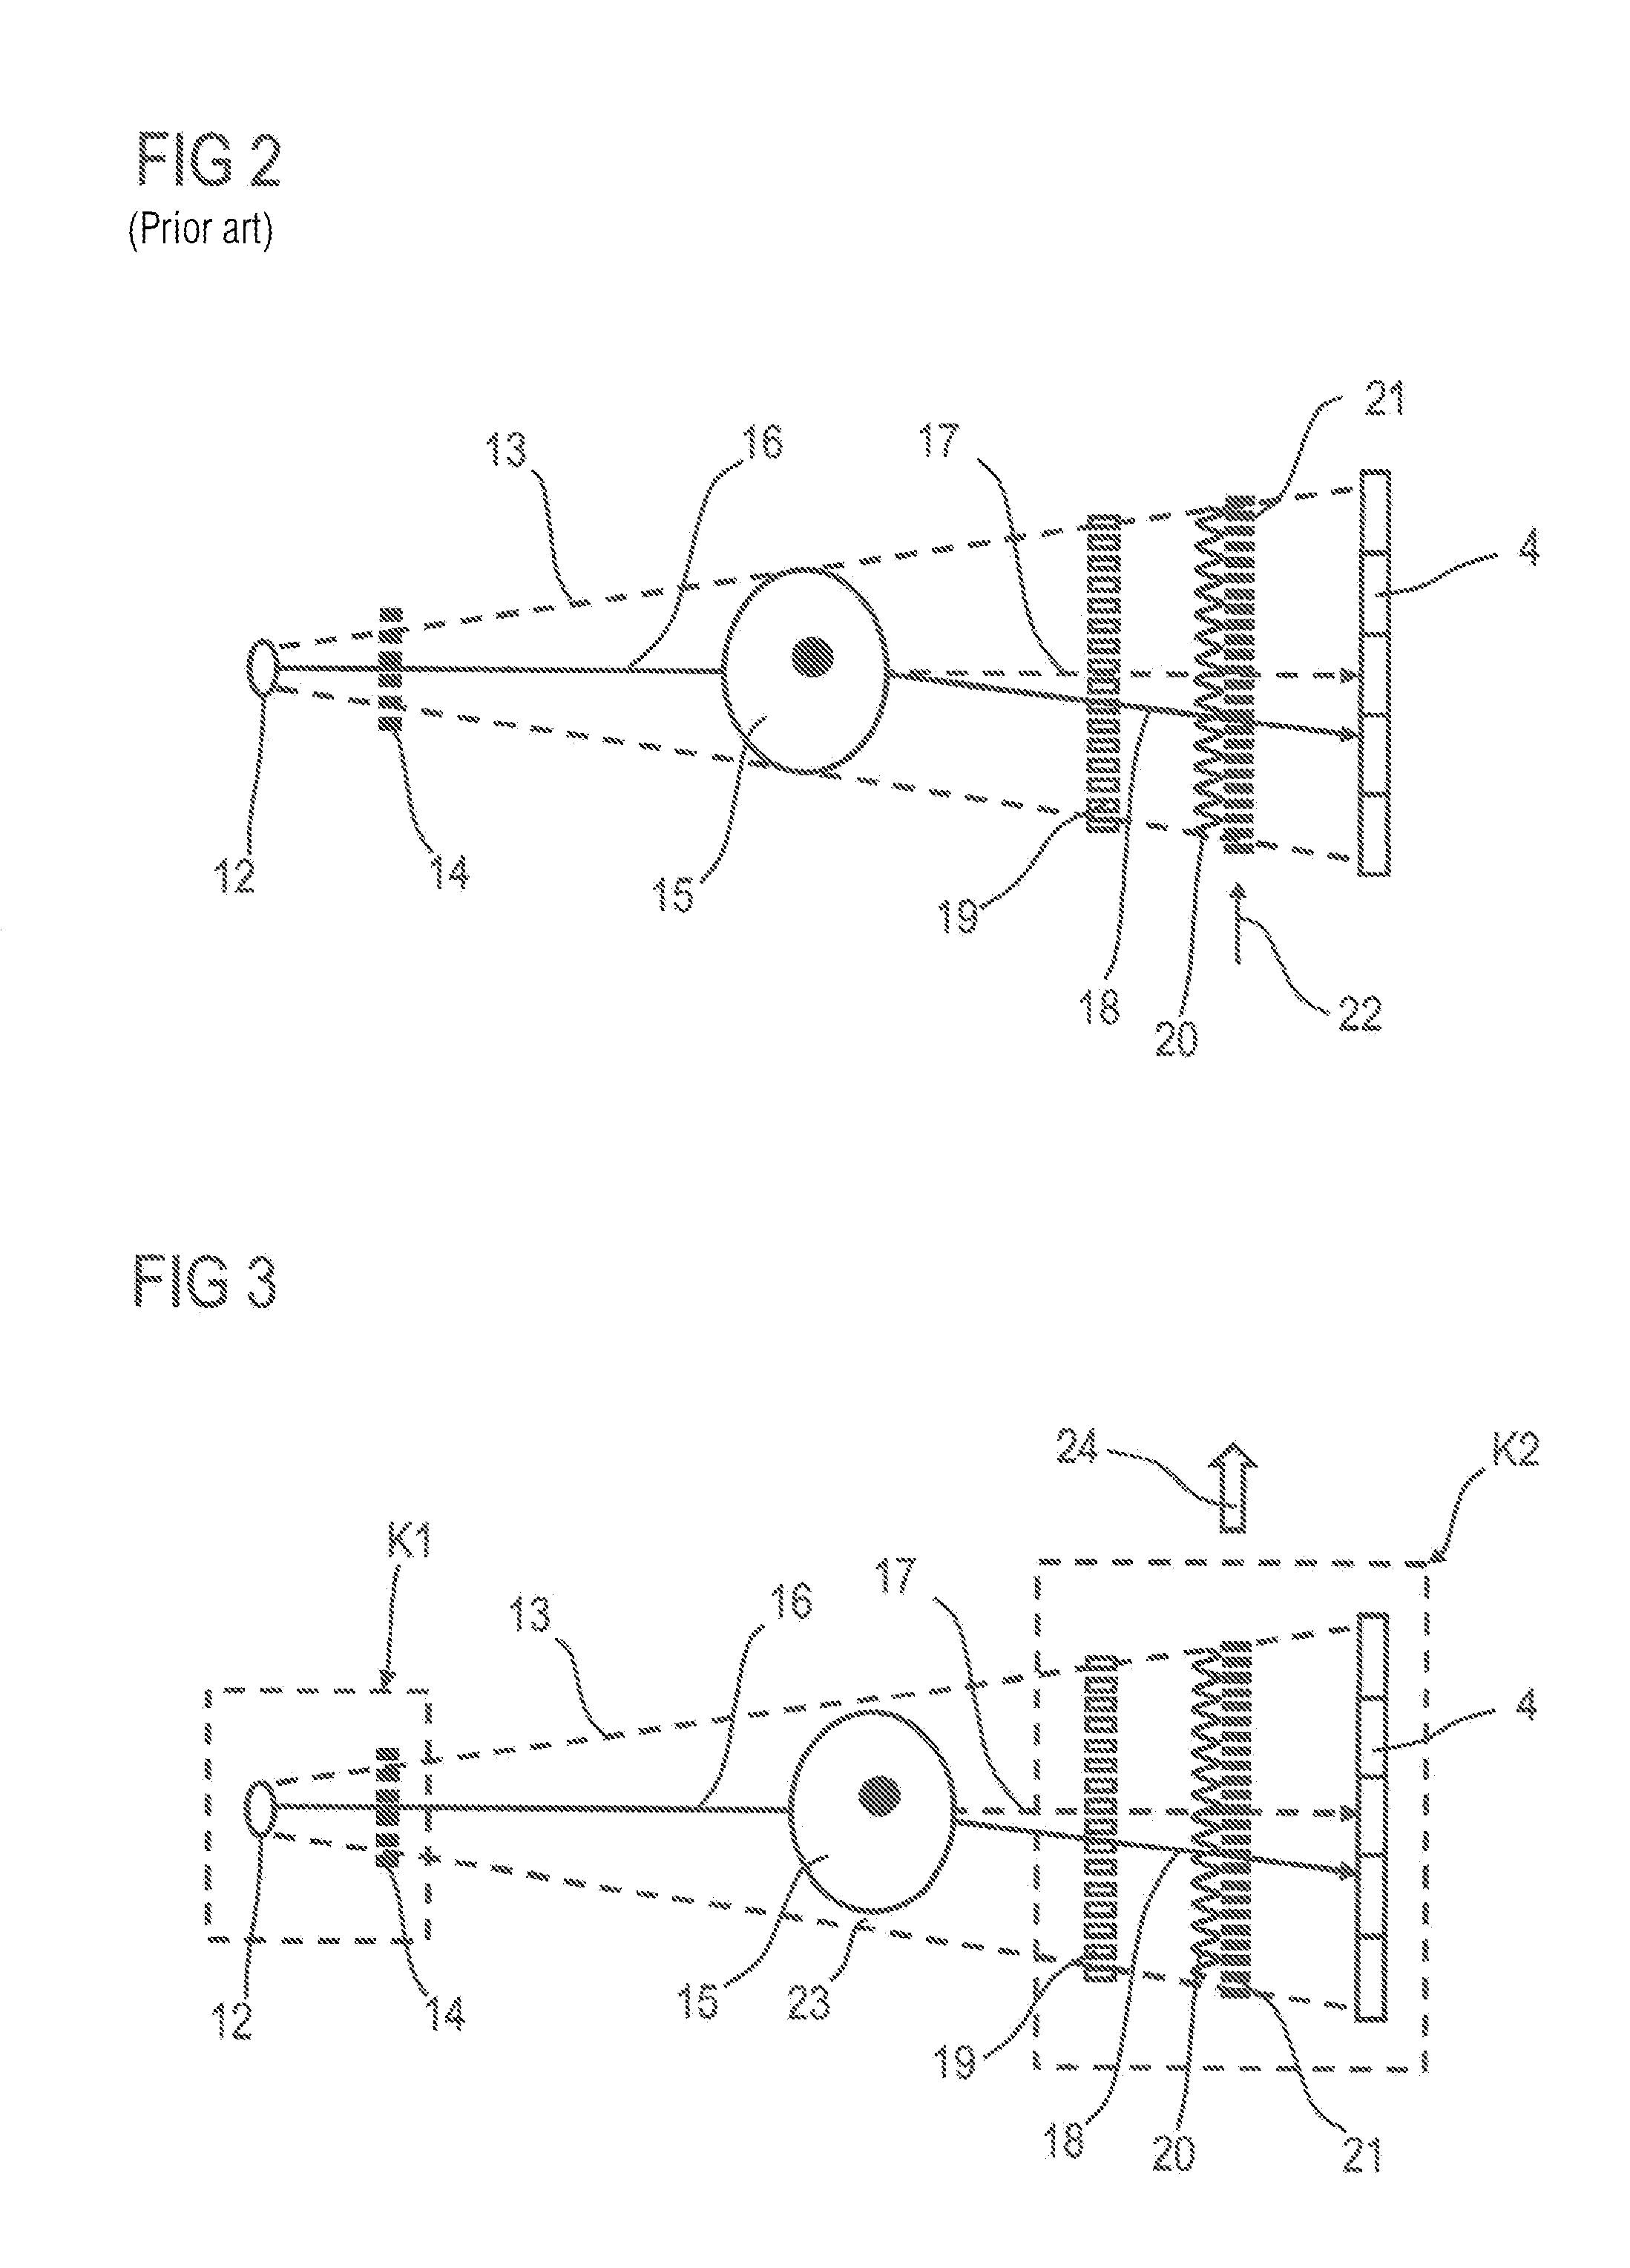 Method for examining an object using an x-ray recording system for phase contrast imaging with displacement measurement